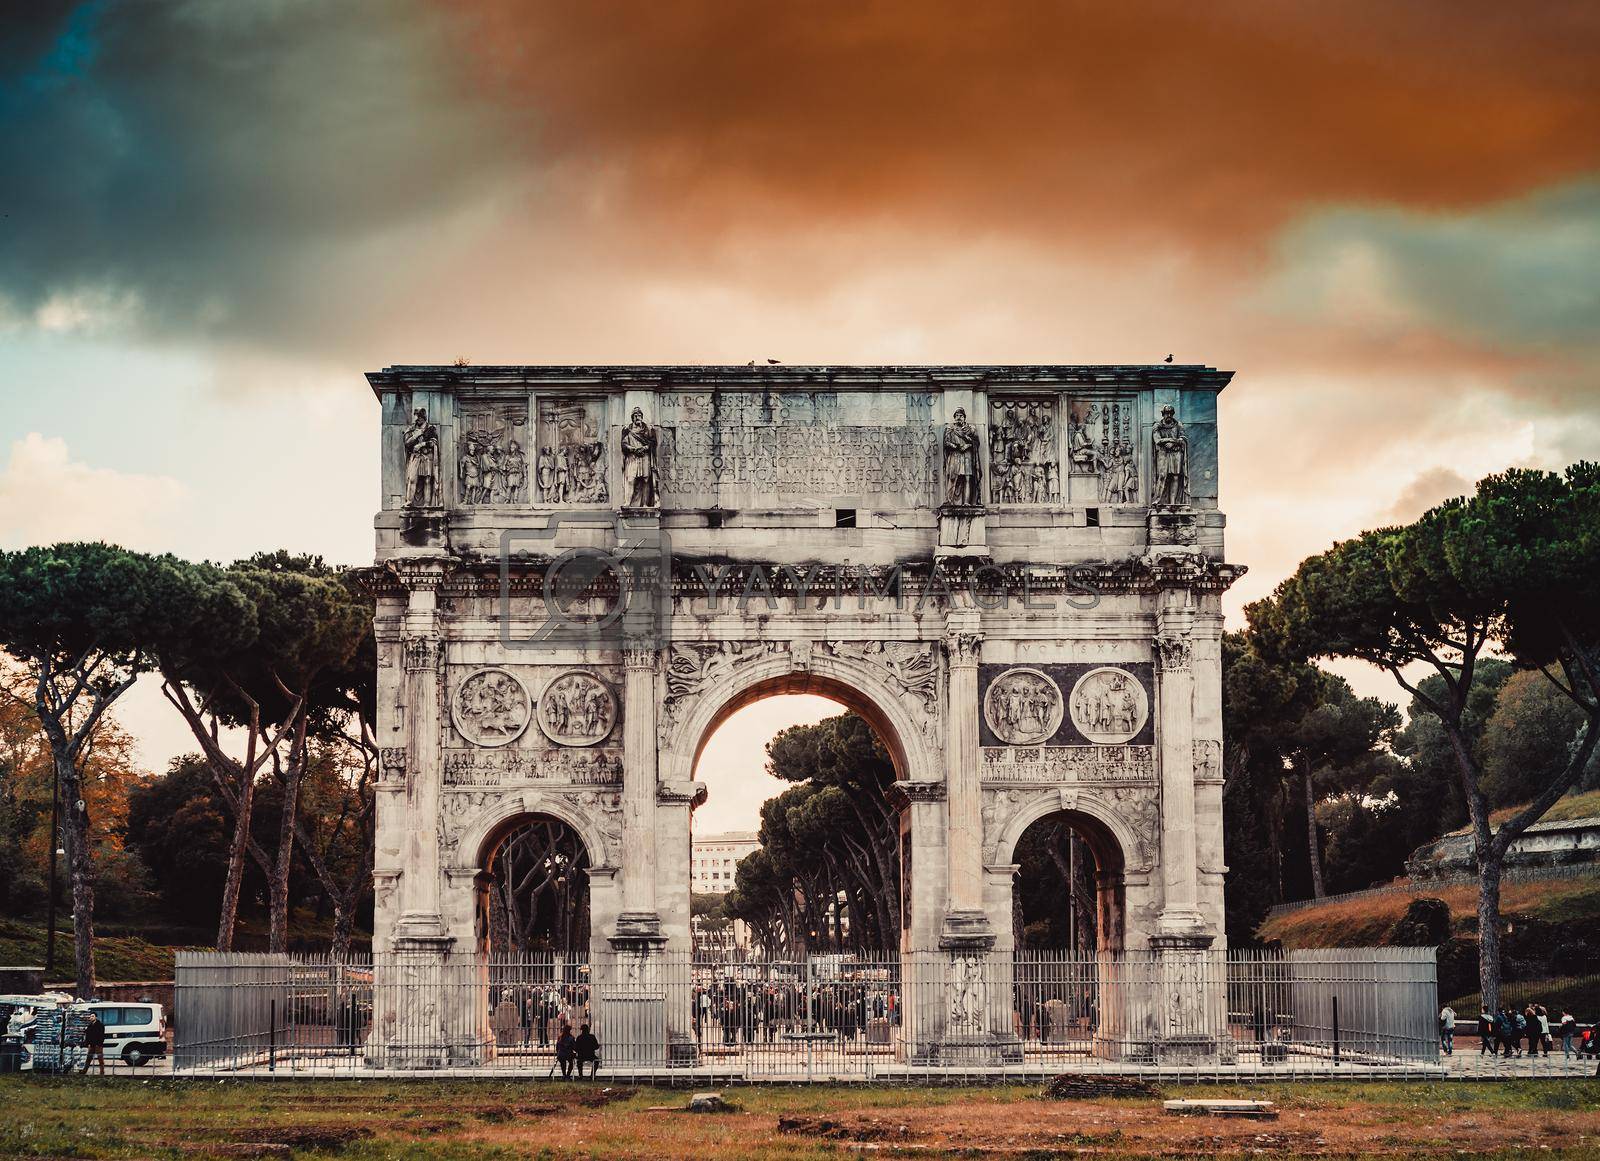 Royalty free image of Arch of Constantine in Rome by tan4ikk1